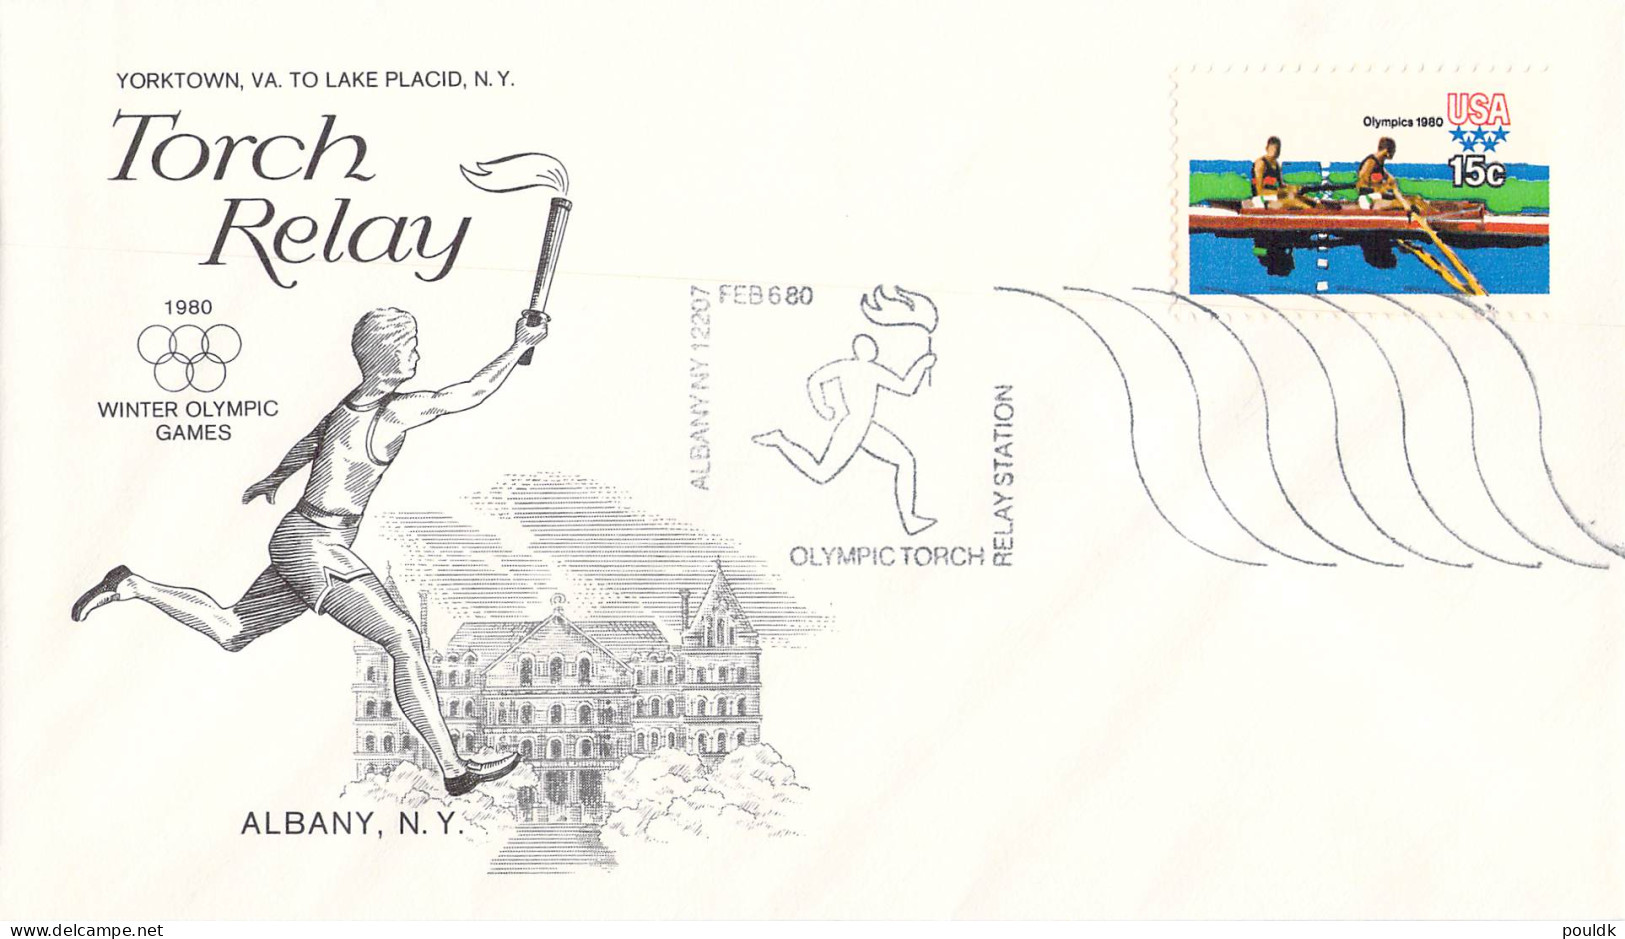 Olympic Games in Lake Placid 1980 - 12 Torch relay covers from USA. Postal weight approx 0,090 kg. Please read